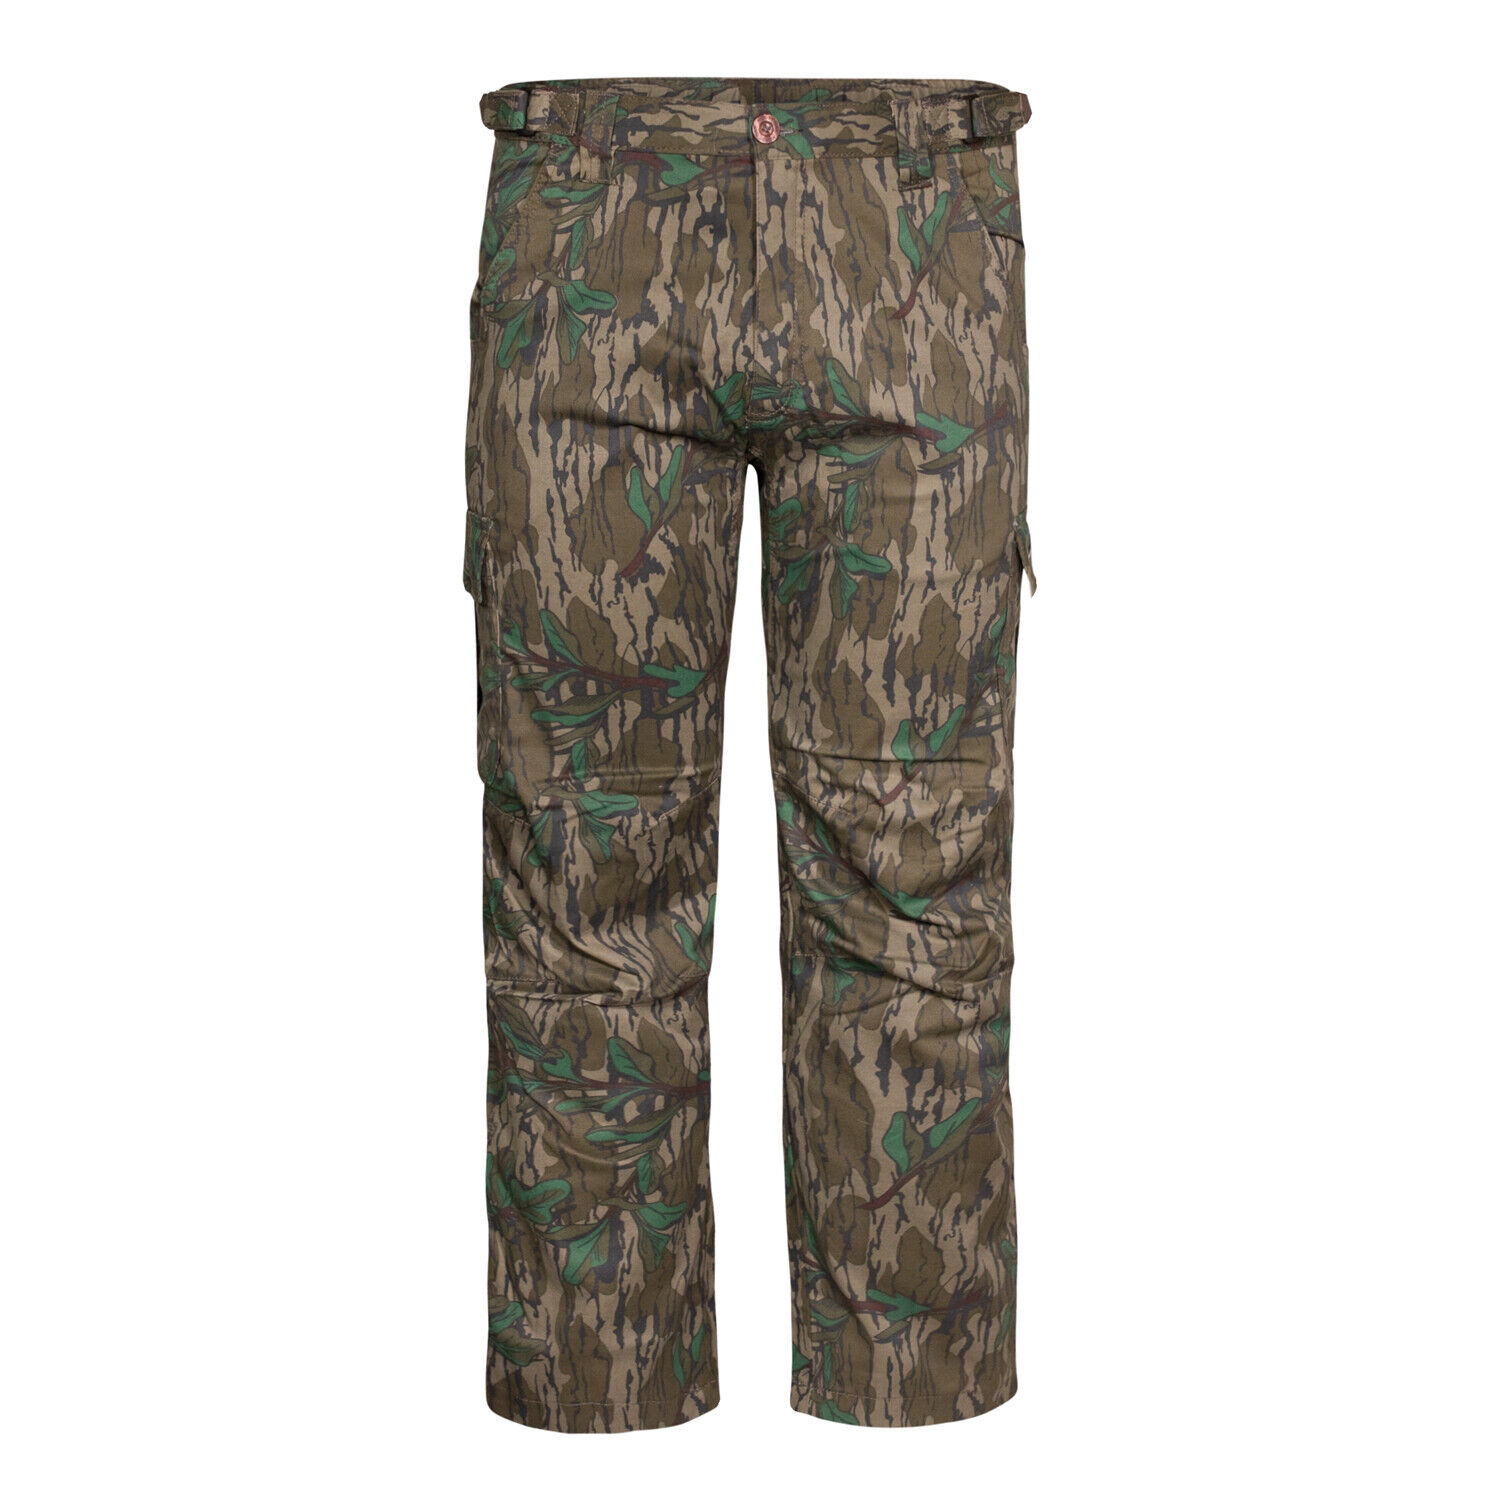 Mossy Oak Cotton Mill 2.0 Camo Hunting Pants for Men Camouflage Clothes ...